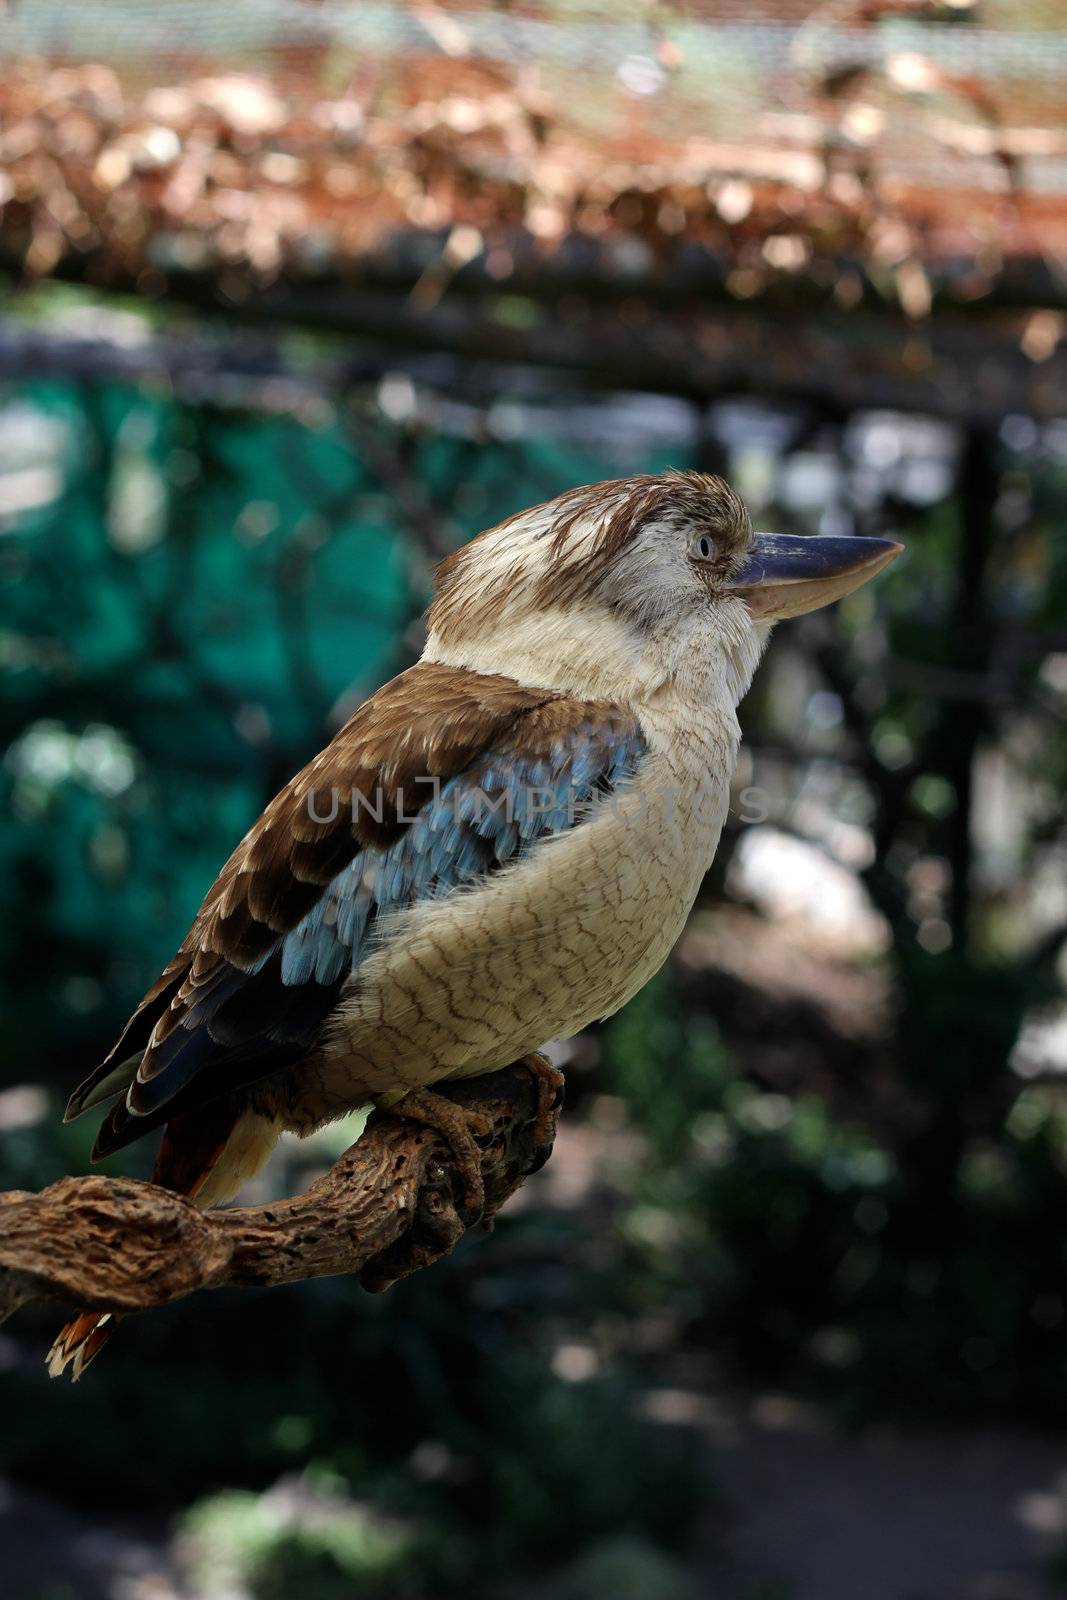 A Blue-Winged Kookaburra on a Branch at the World of Birds in Cape Town, South Africa